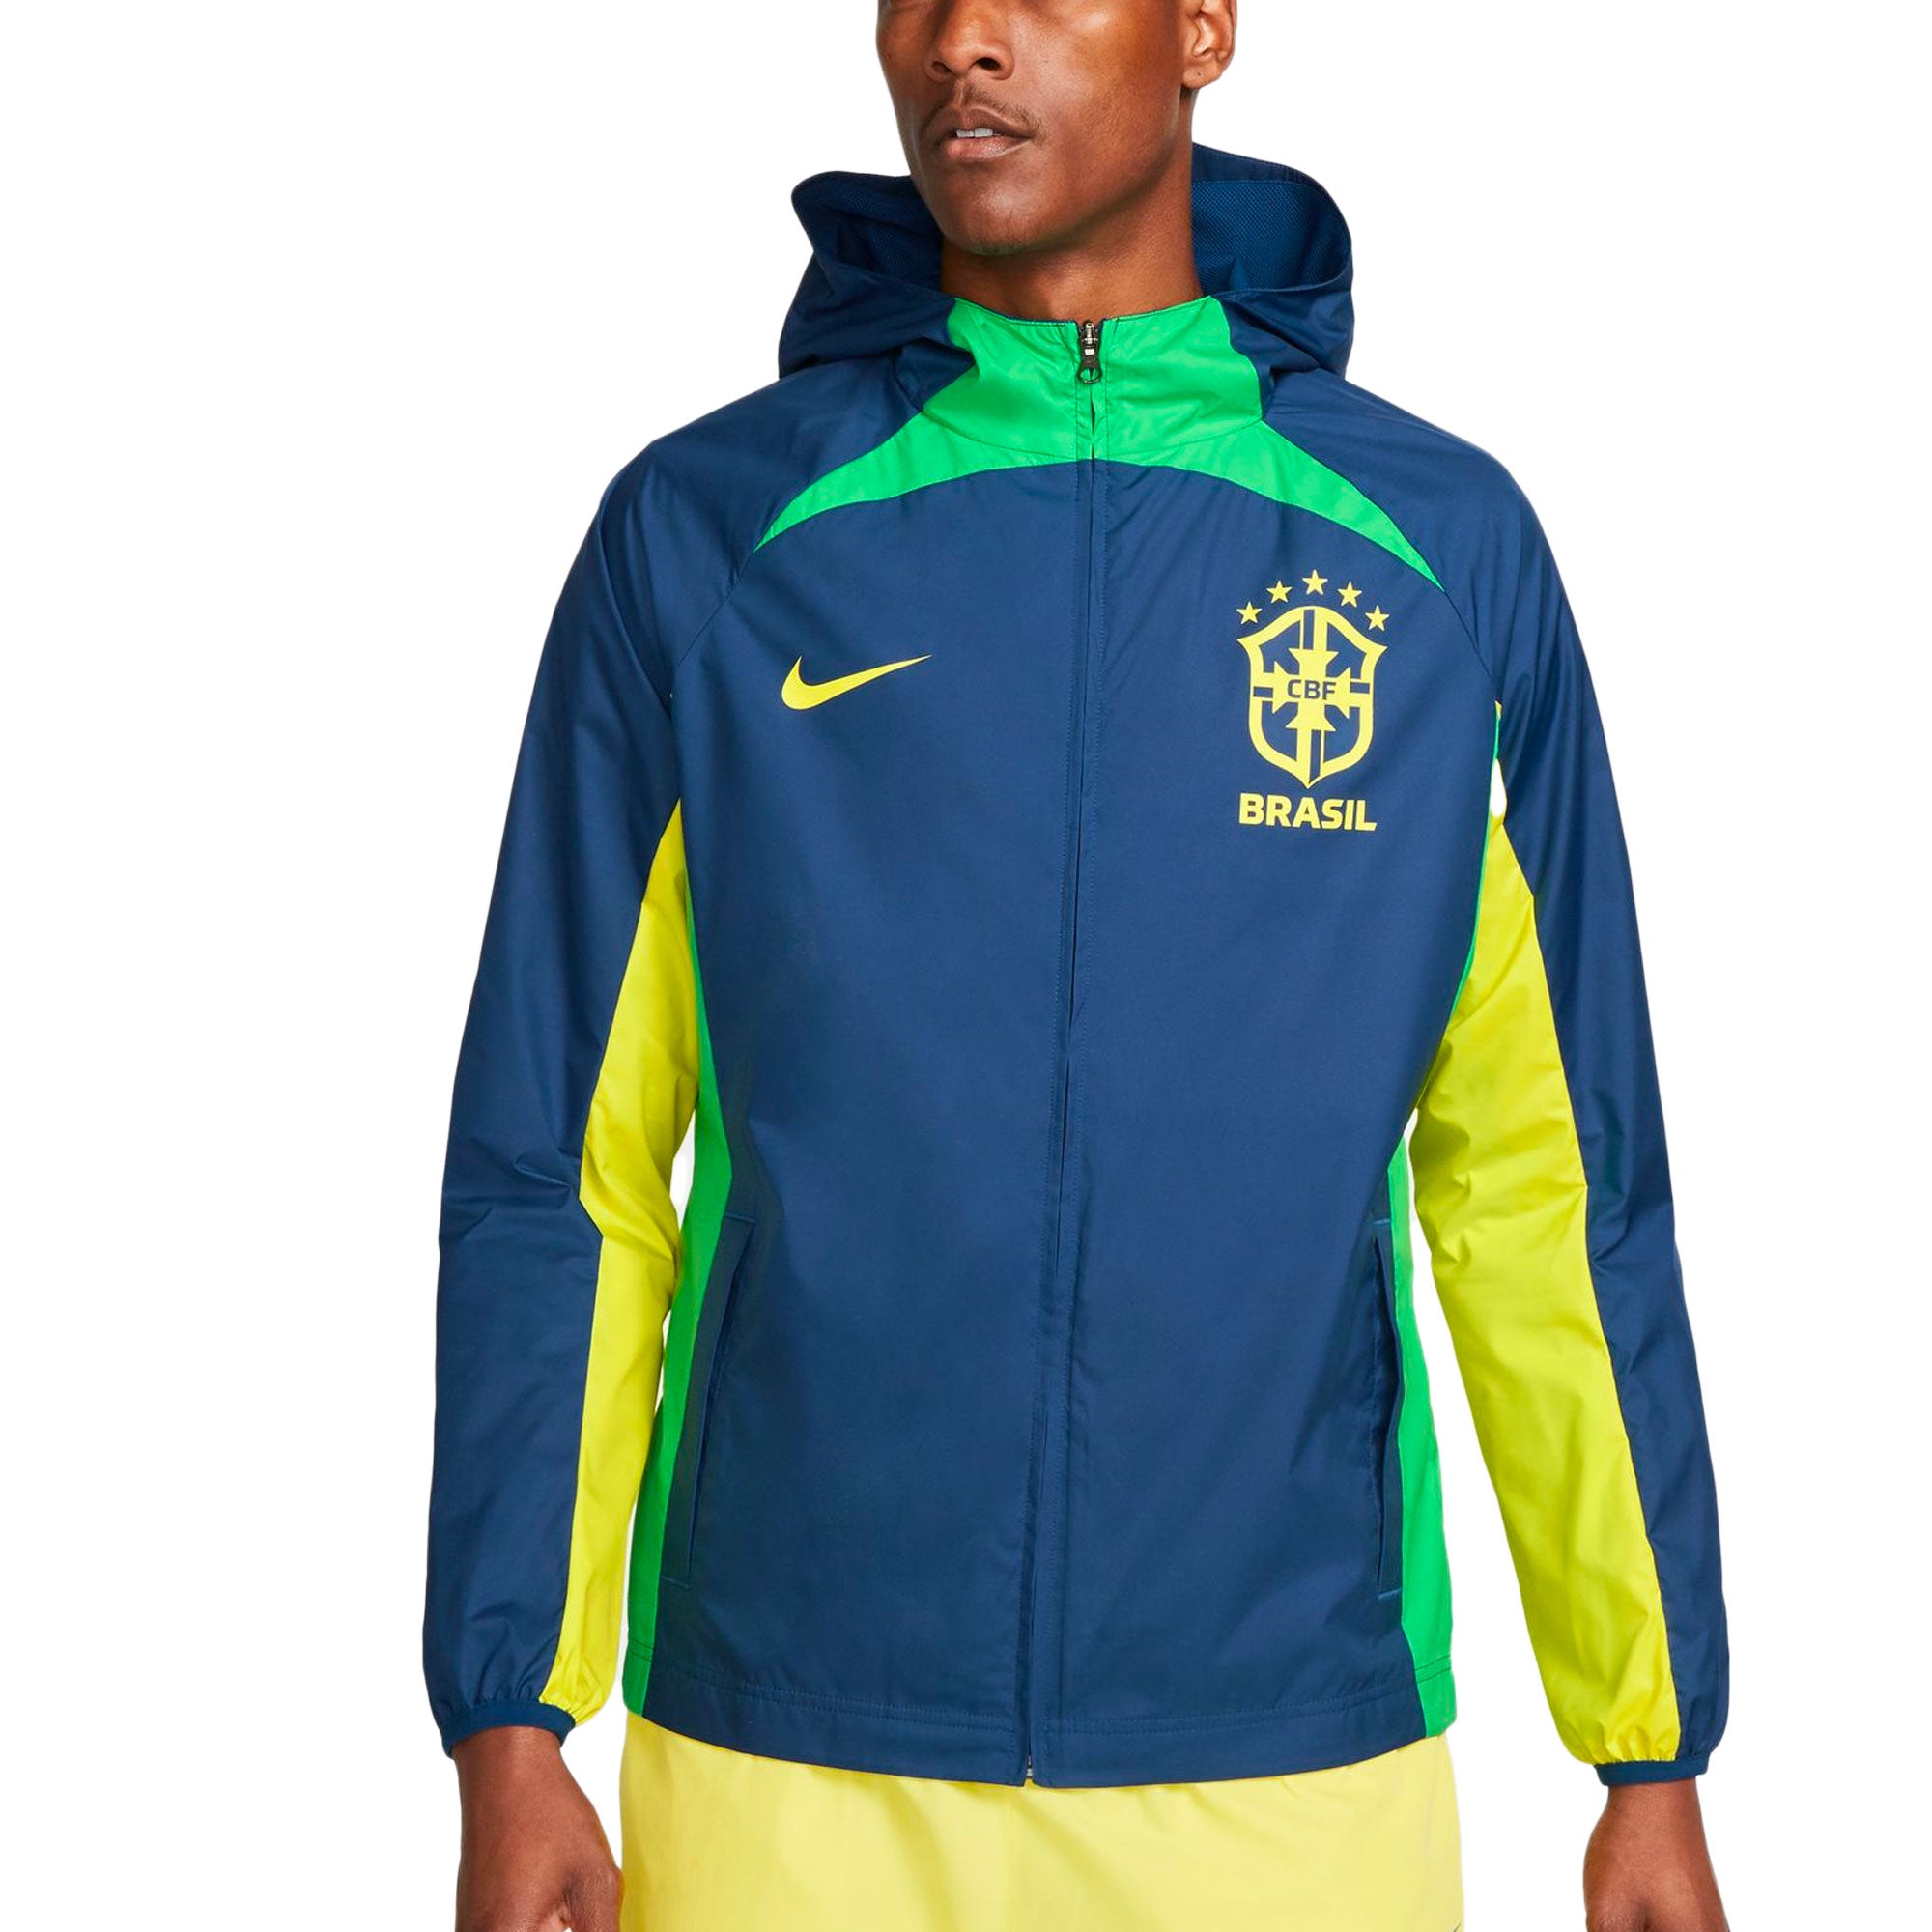 Men's Nike Yellow/Blue Tottenham Hotspur All-Weather Full-Zip Hoodie Jacket Size: Small